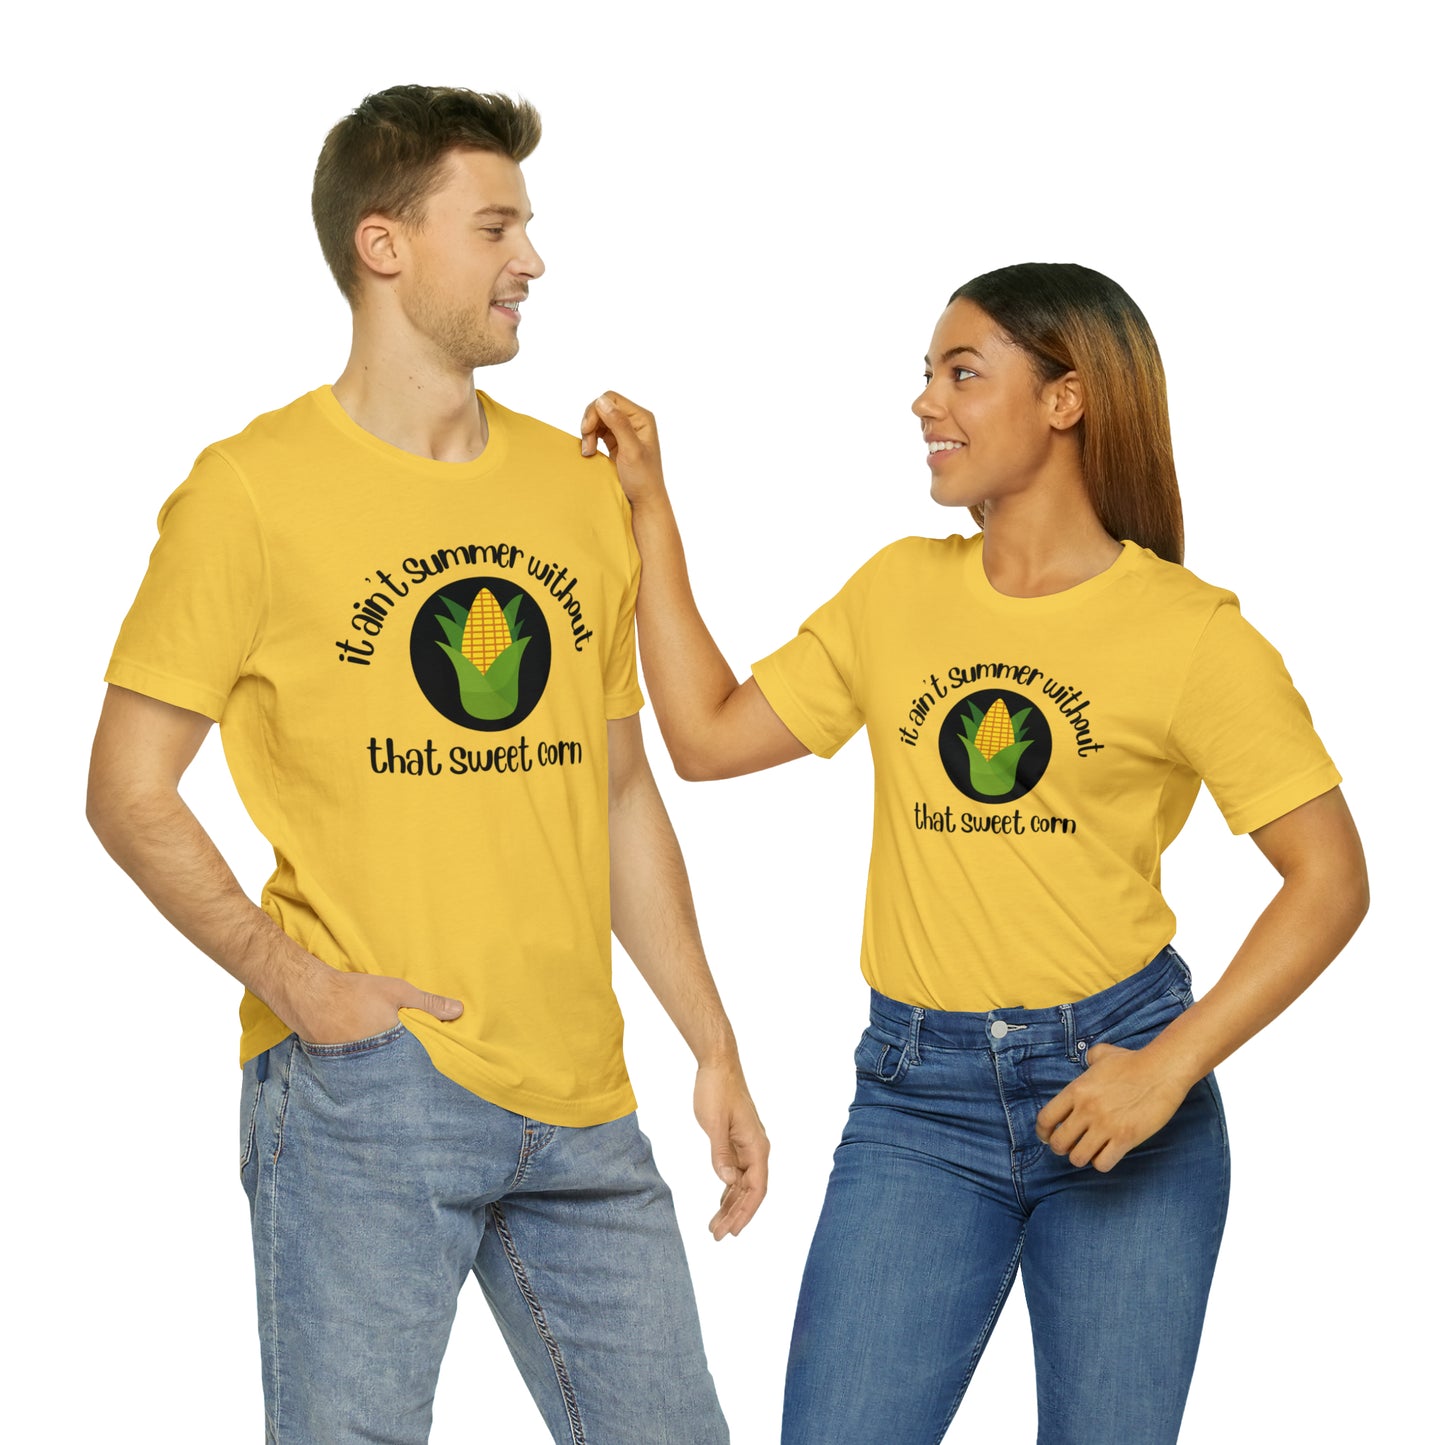 It's Ain't Summer Without That Sweet Corn Unisex Short Sleeve Tee S-3XL